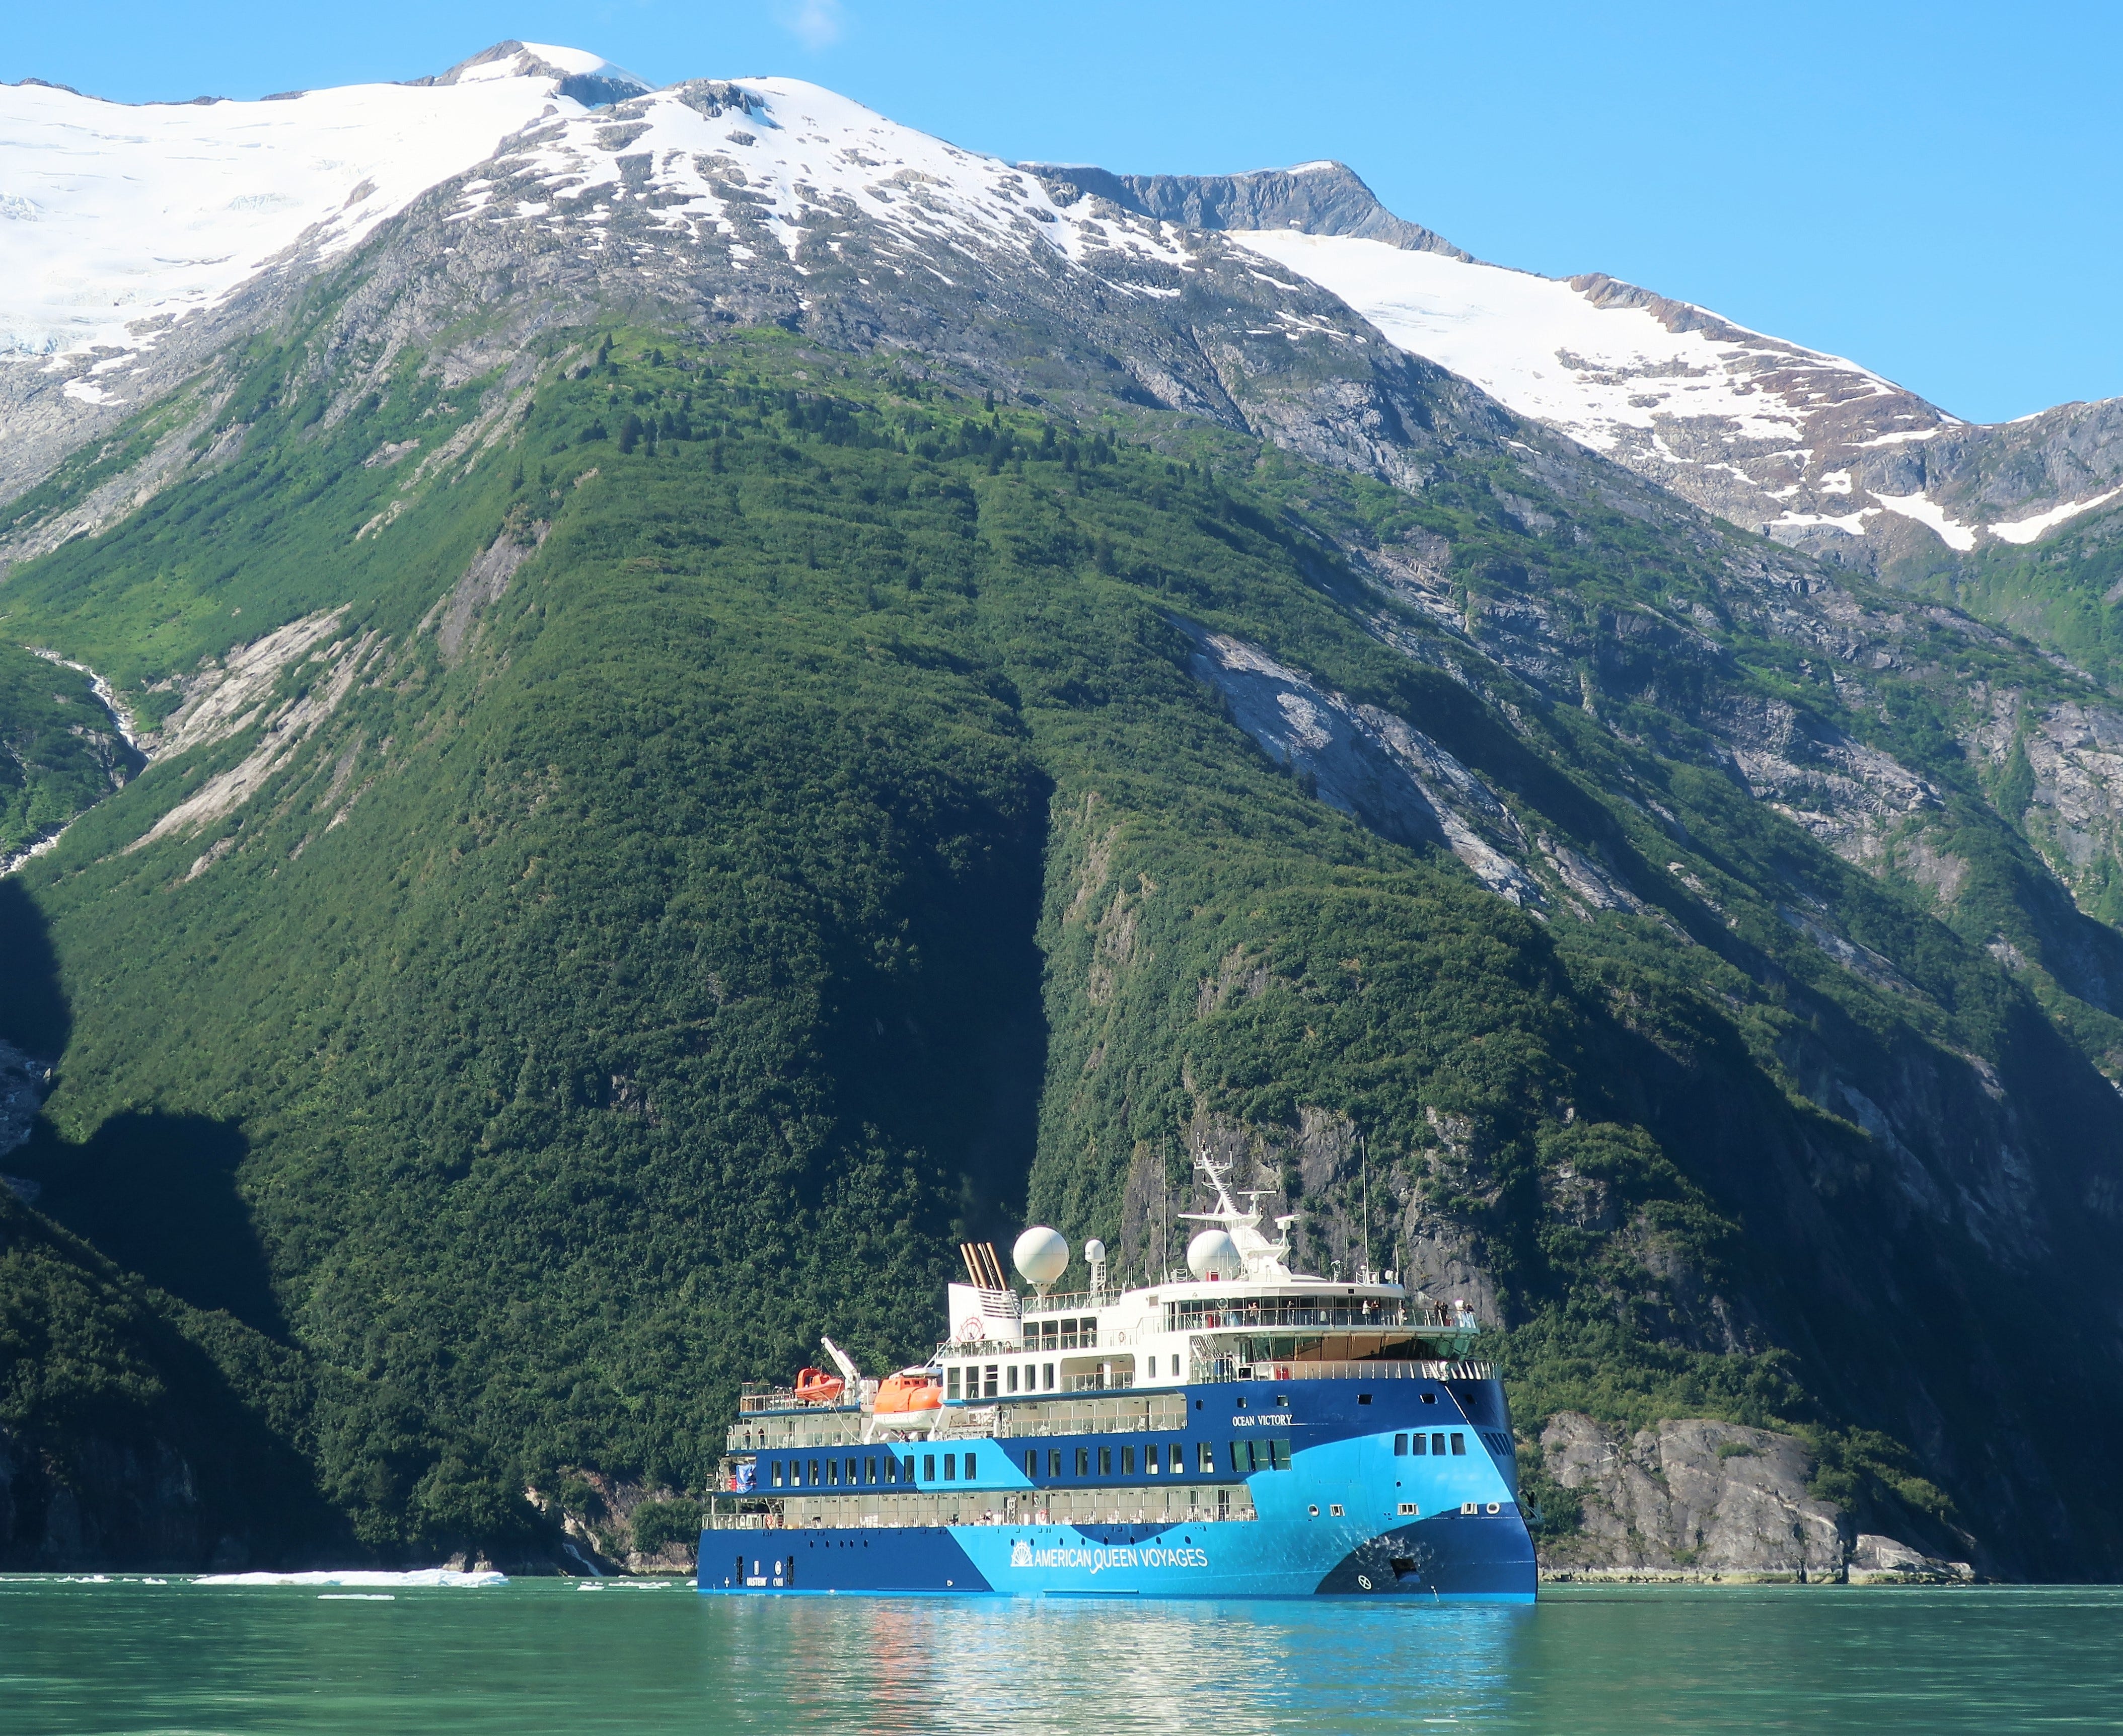 Cruising Alaska expedition-style with